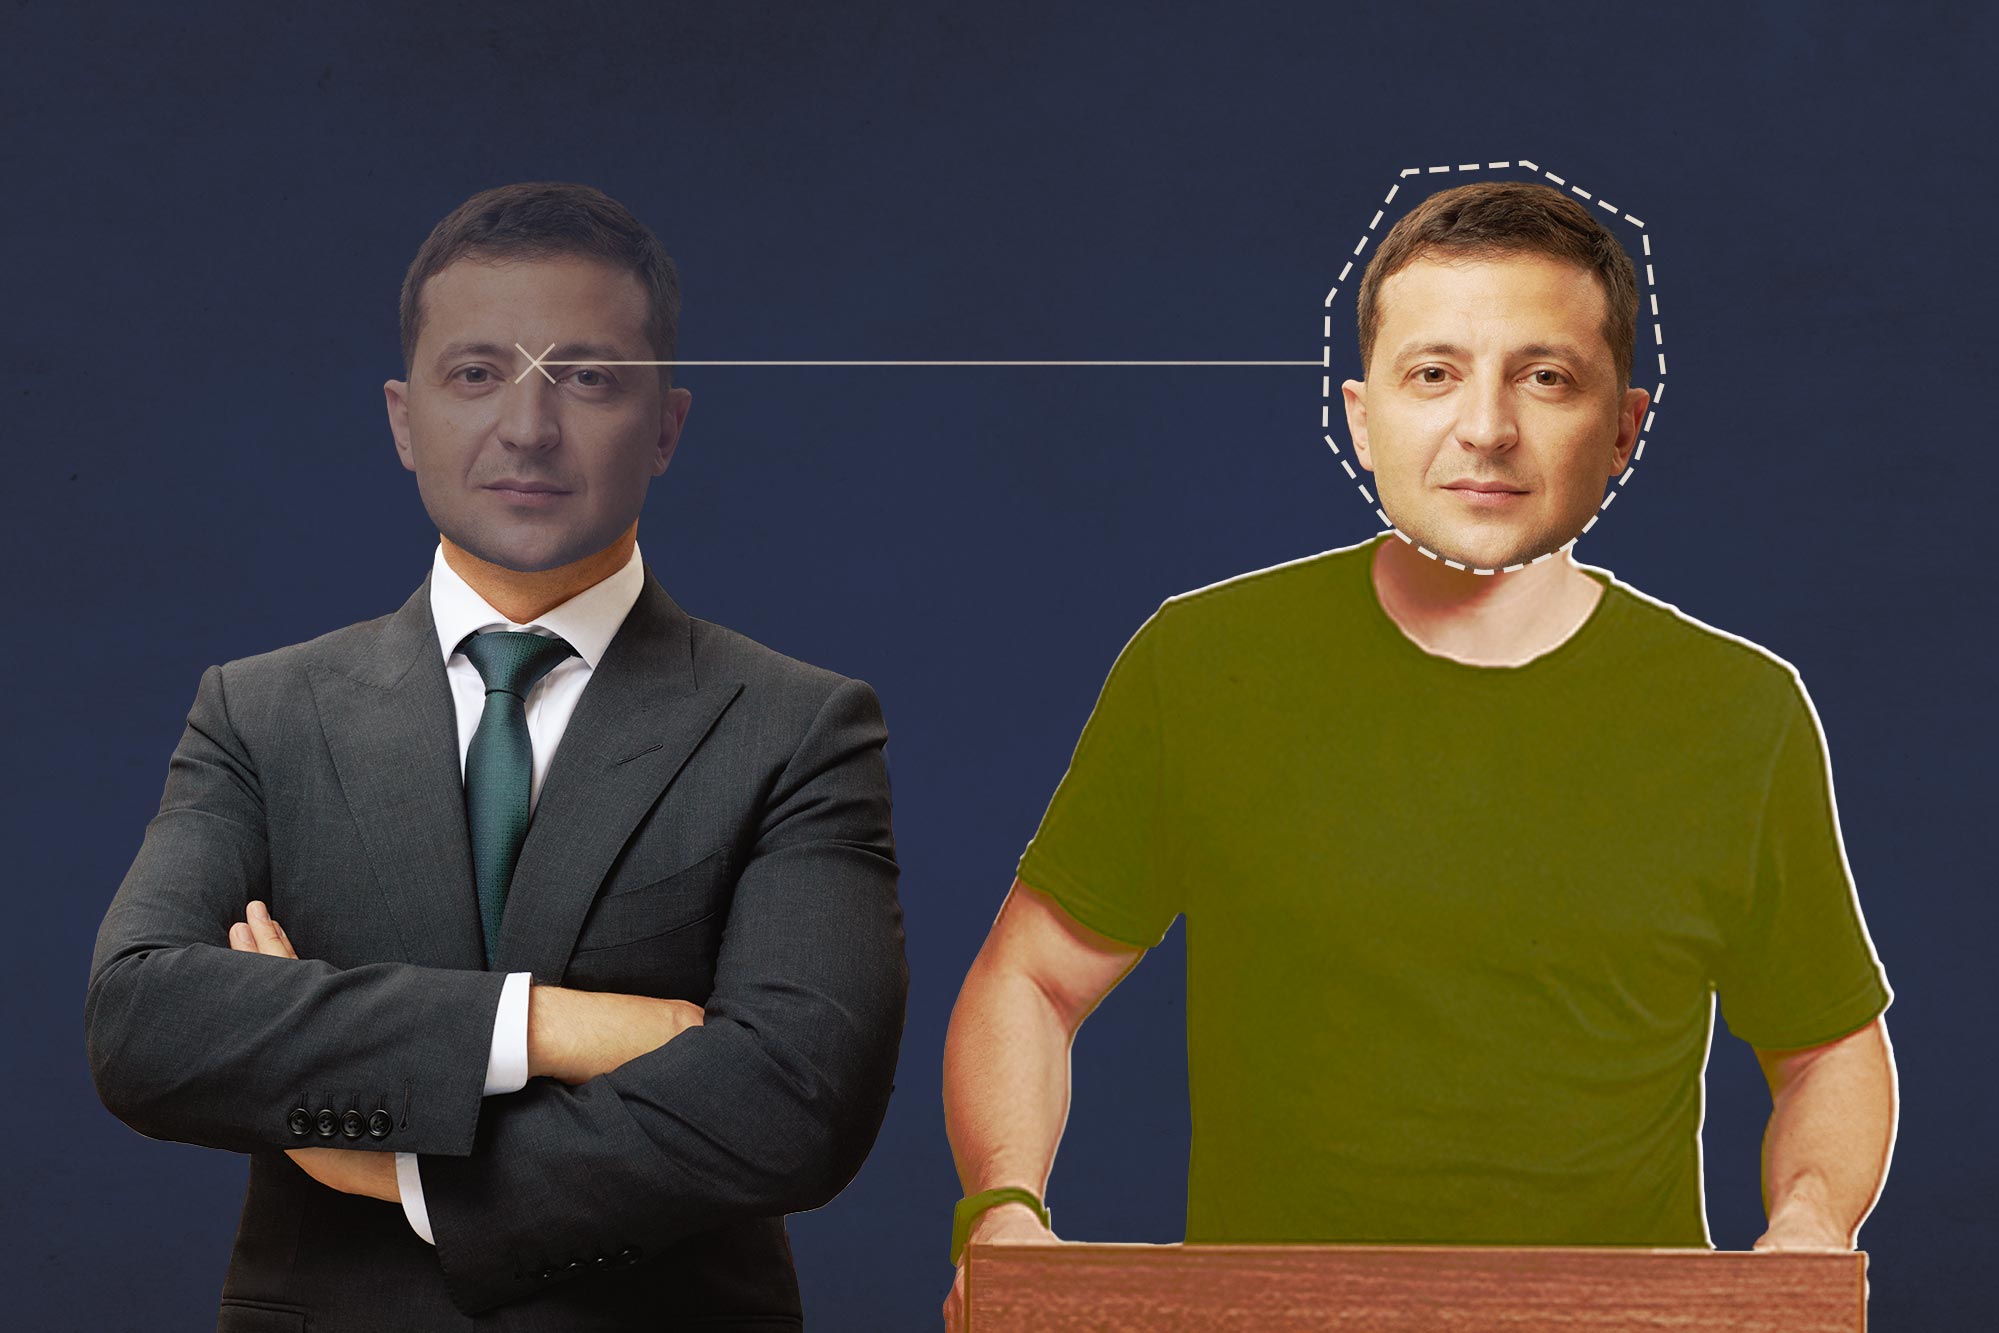 Illustration of a real photo of Ukraine President Volodymyr Zelenskyy's head being copy/pasted onto a fake body